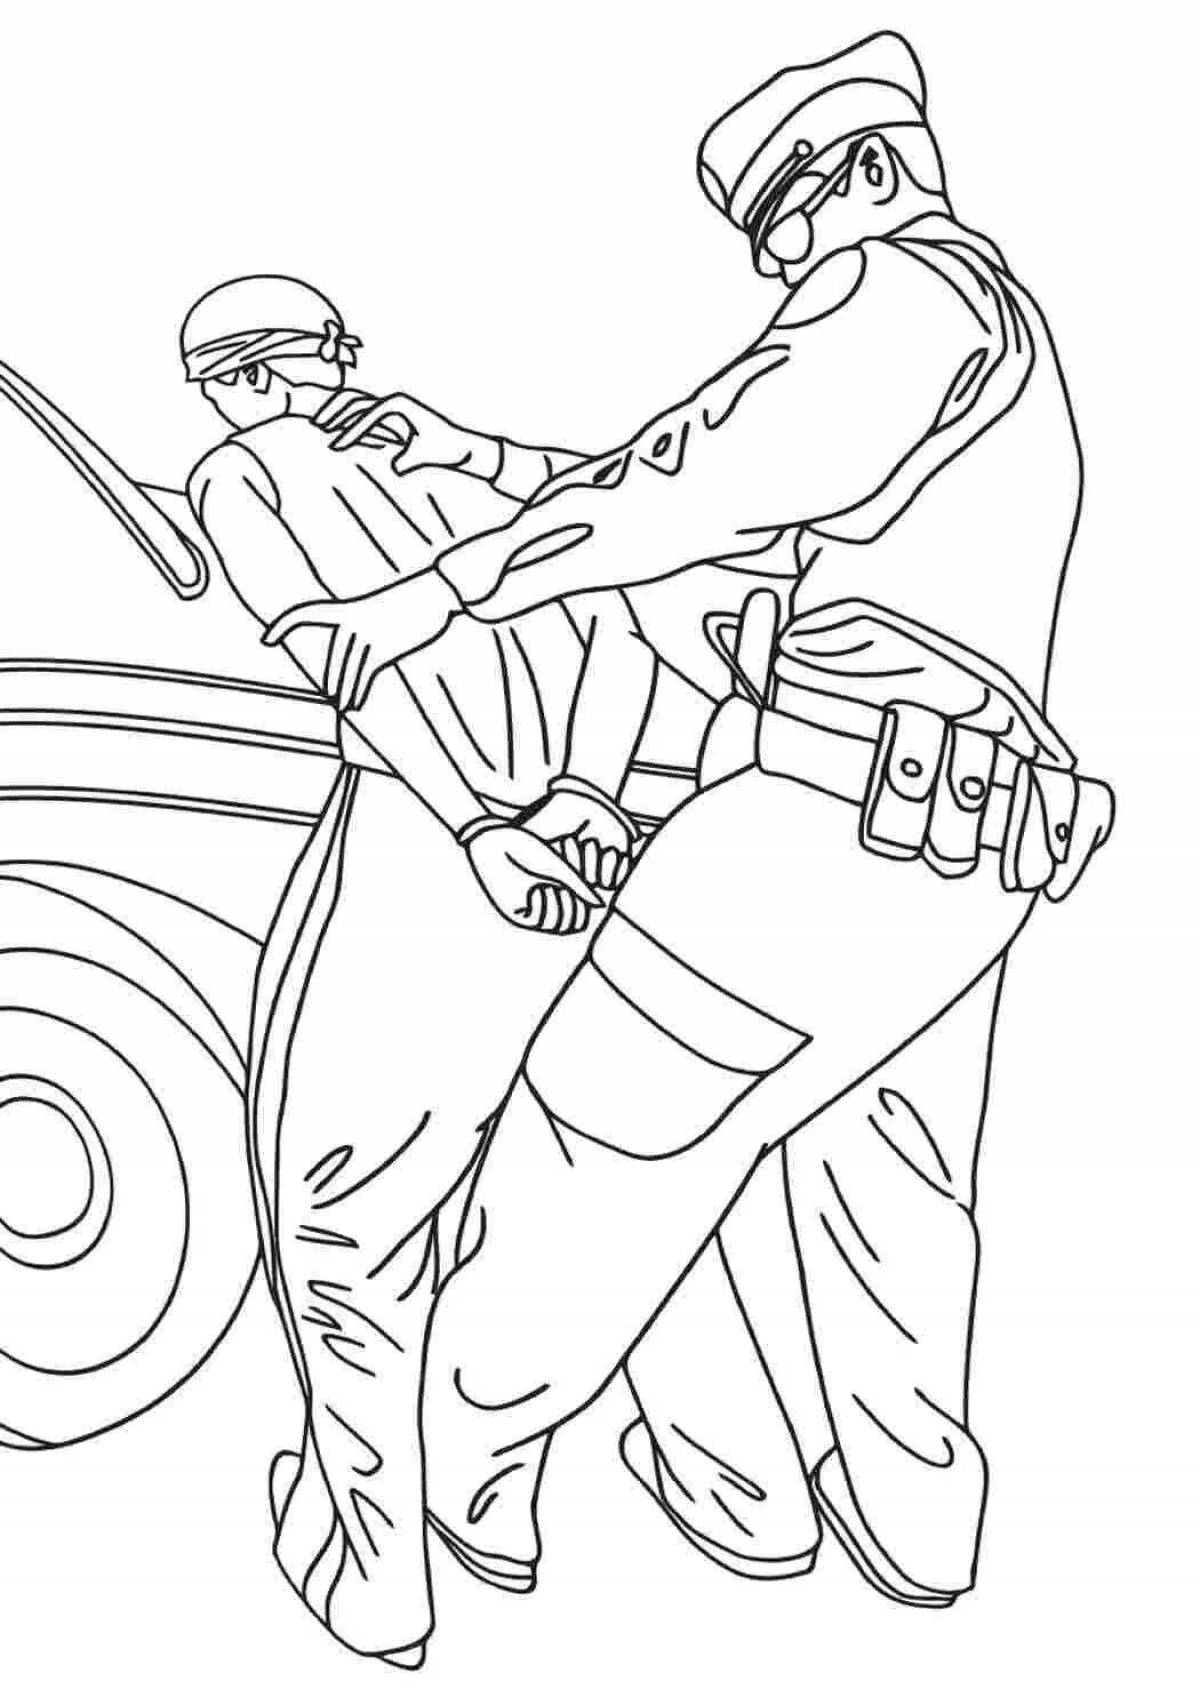 Coloring page robbery - involvement